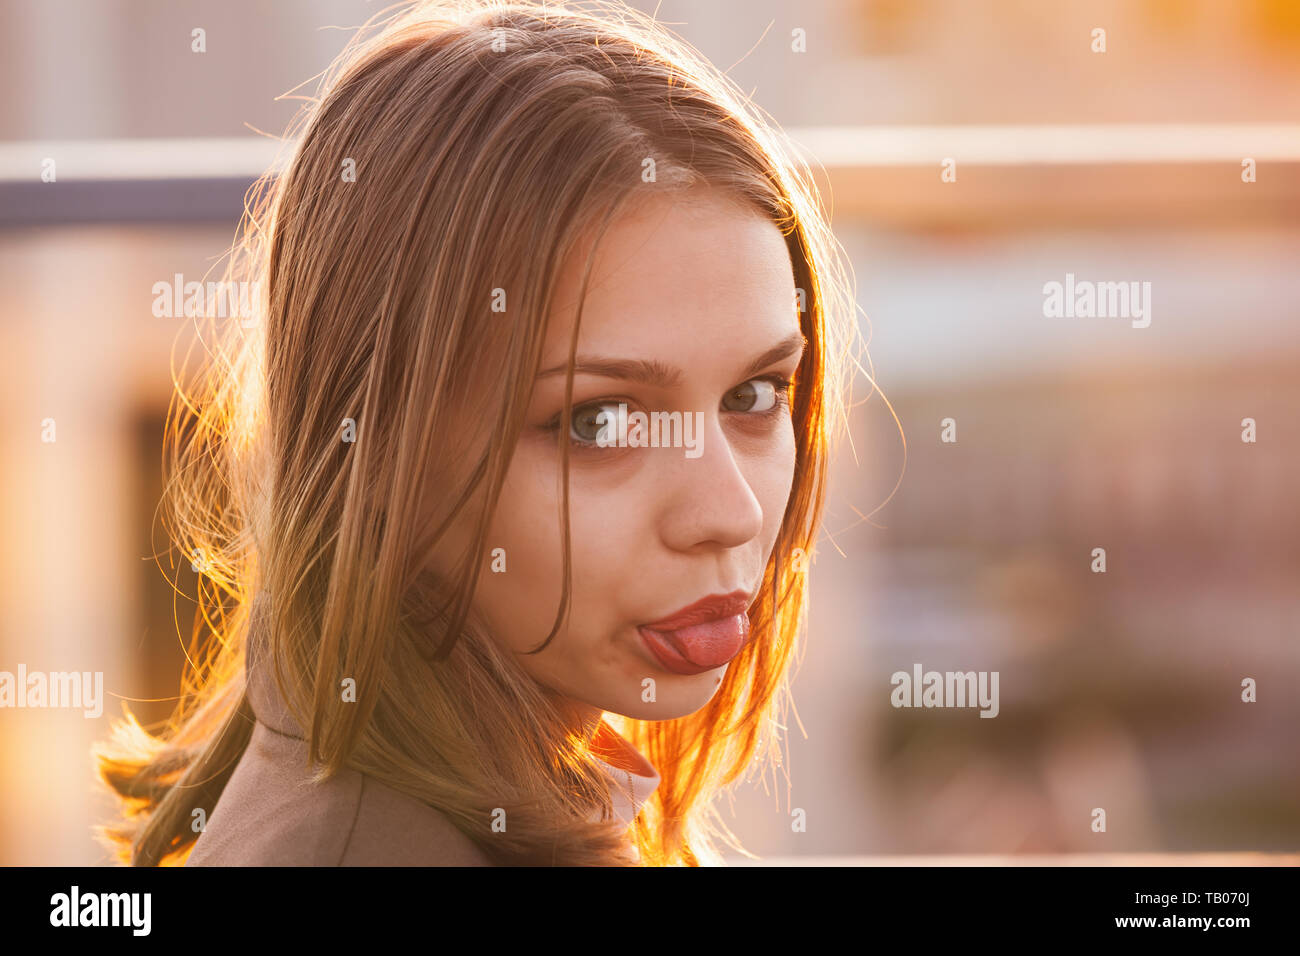 Beautiful European teenage girl shows tongue, close up outdoor portrait with back-lit sunlight Stock Photo